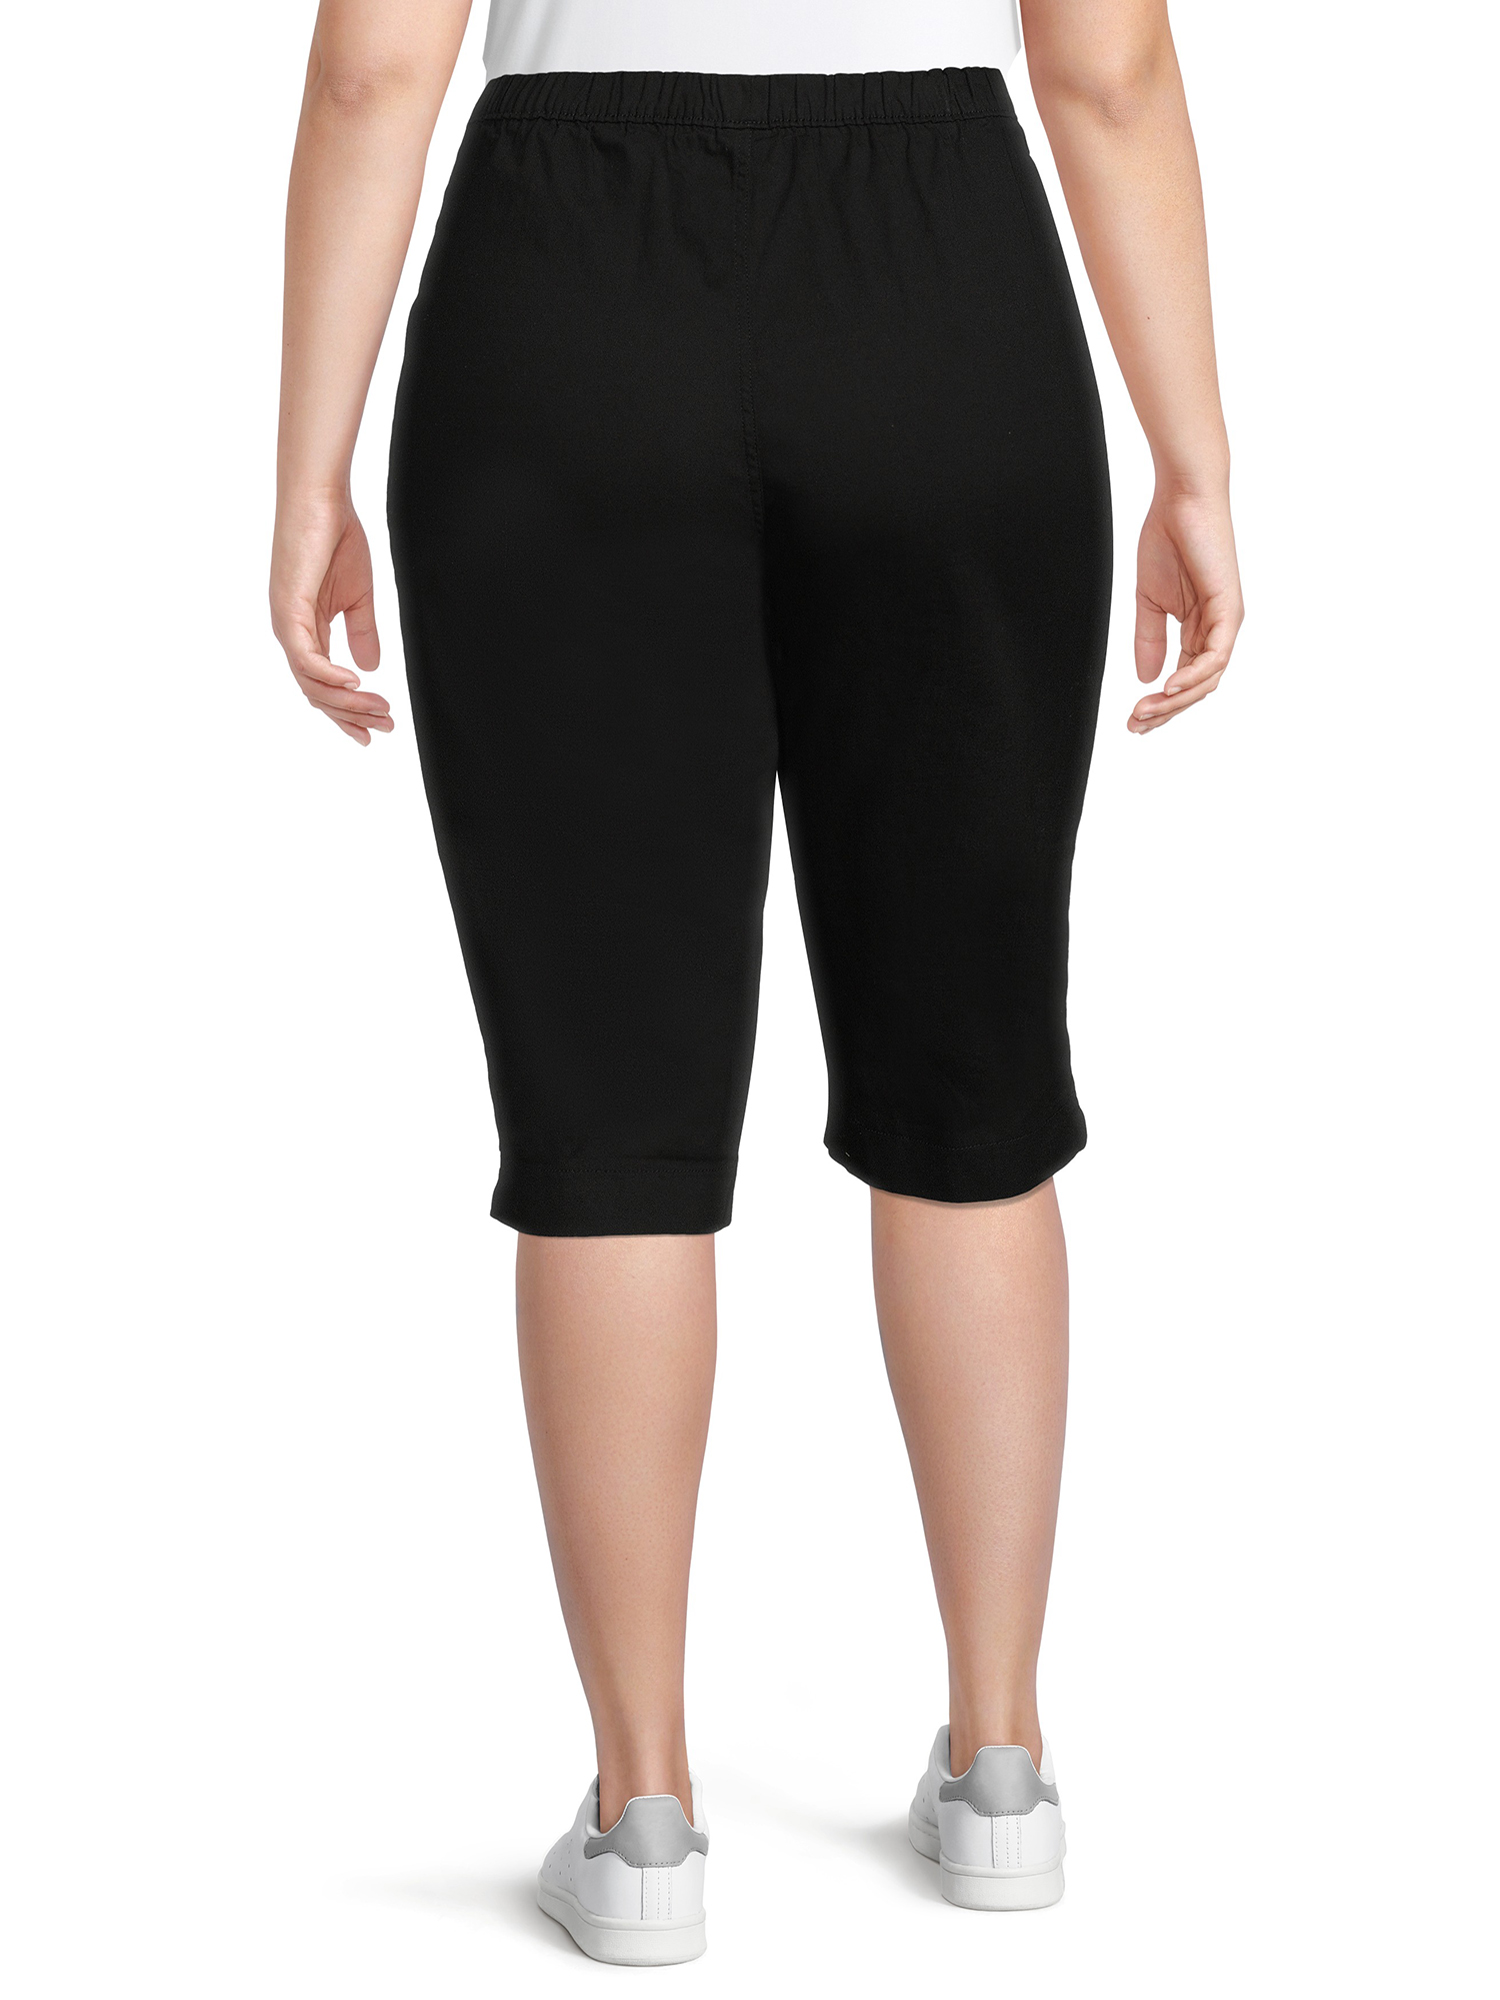 Just My Size Women's Plus Size Pull On 2 Pocket Stretch Capri - image 3 of 6